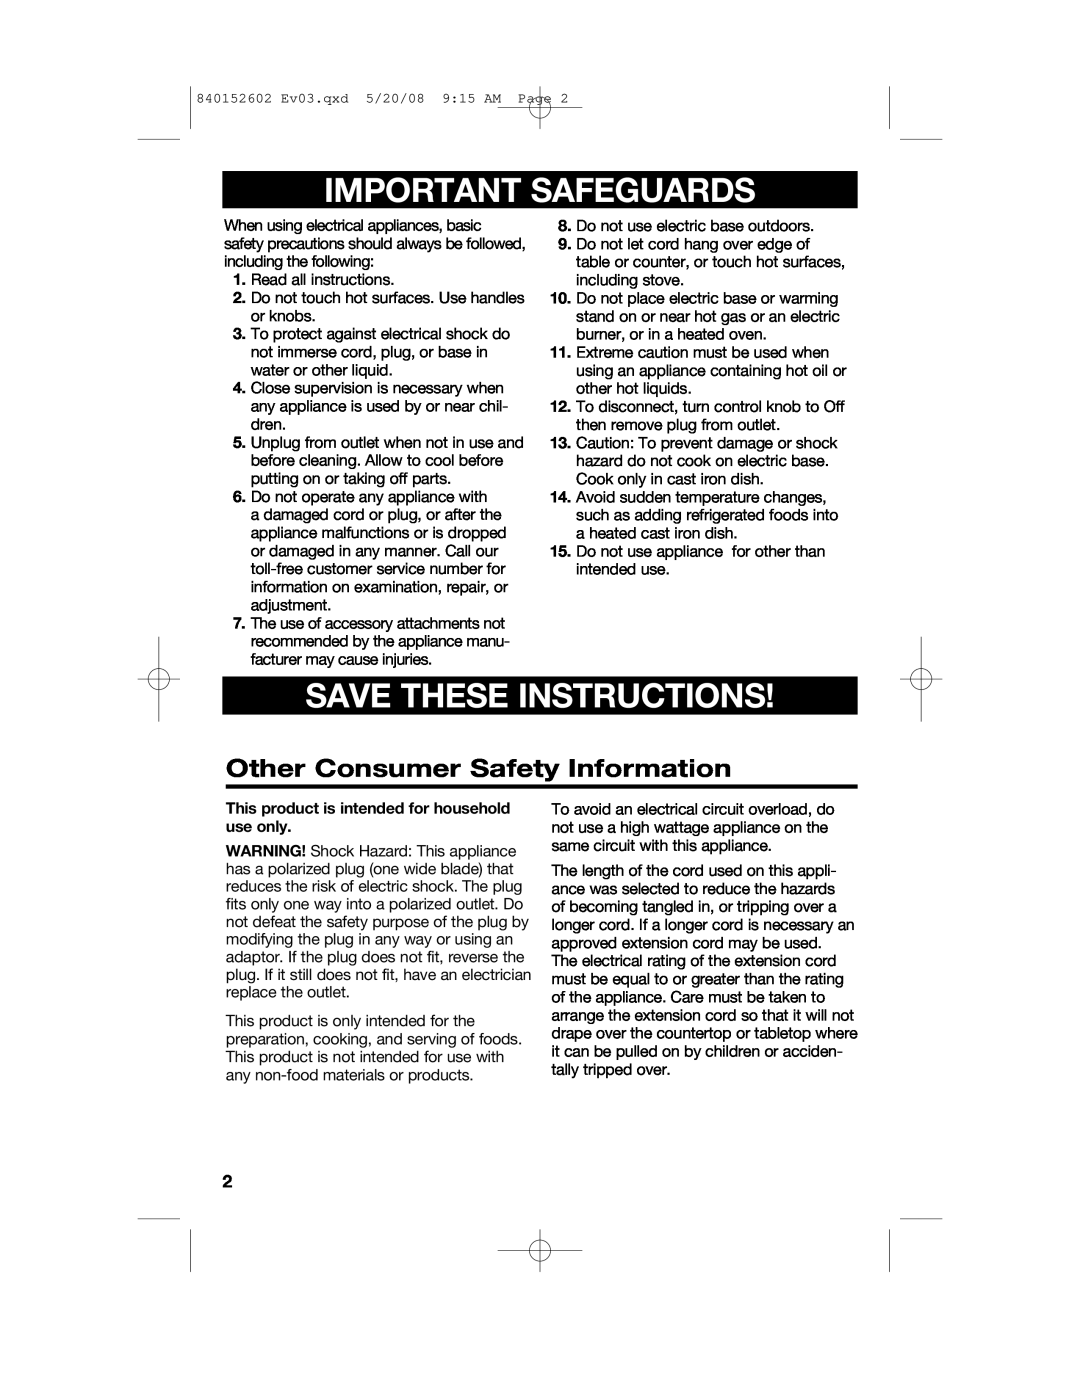 Hamilton Beach 840152602 manual Important Safeguards, Save These Instructions, Other Consumer Safety Information 